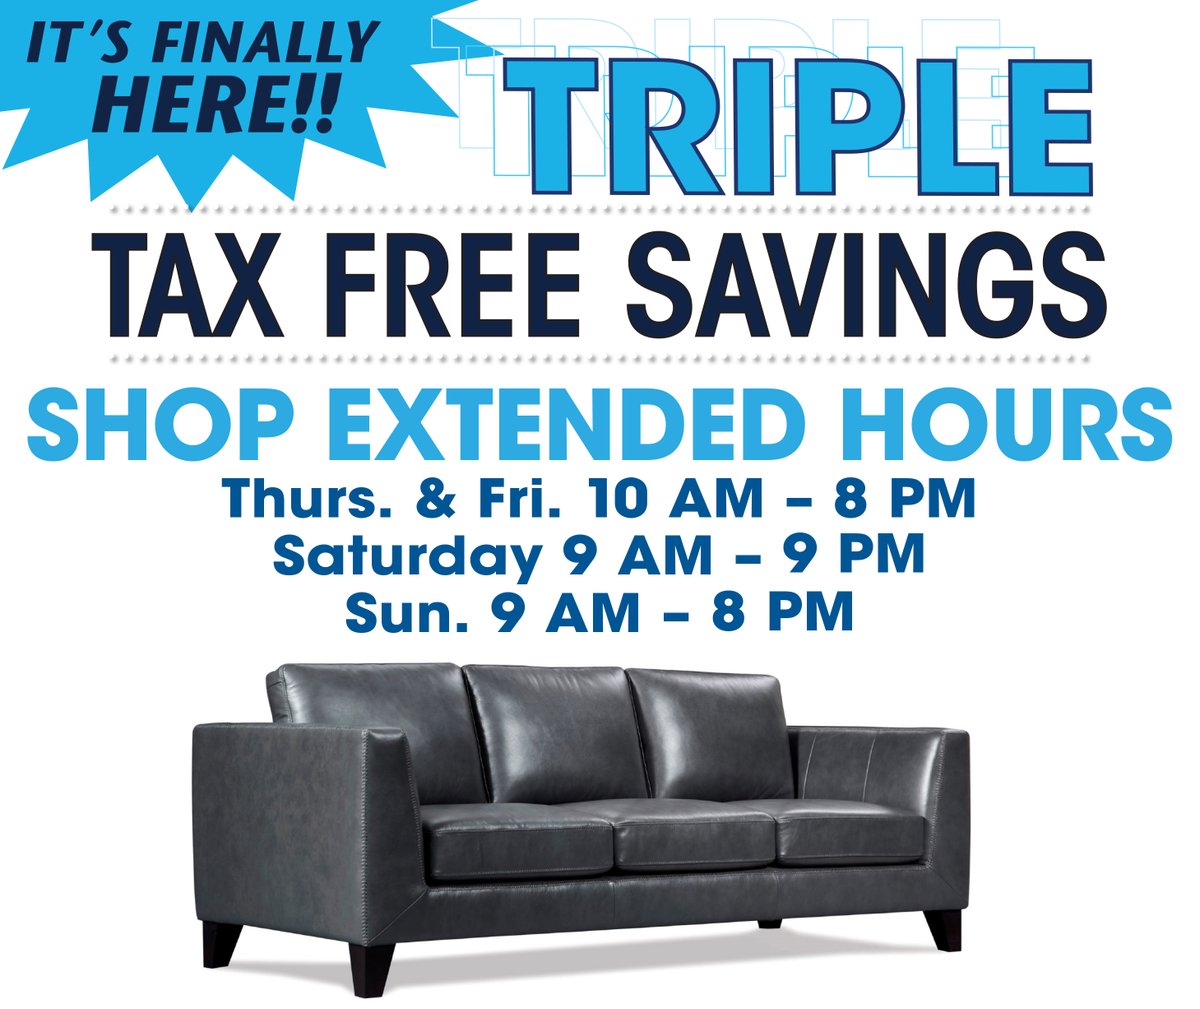 This weekend is TAX FREE Weekend! Come in and save! We've extended our hours, so don't miss it!